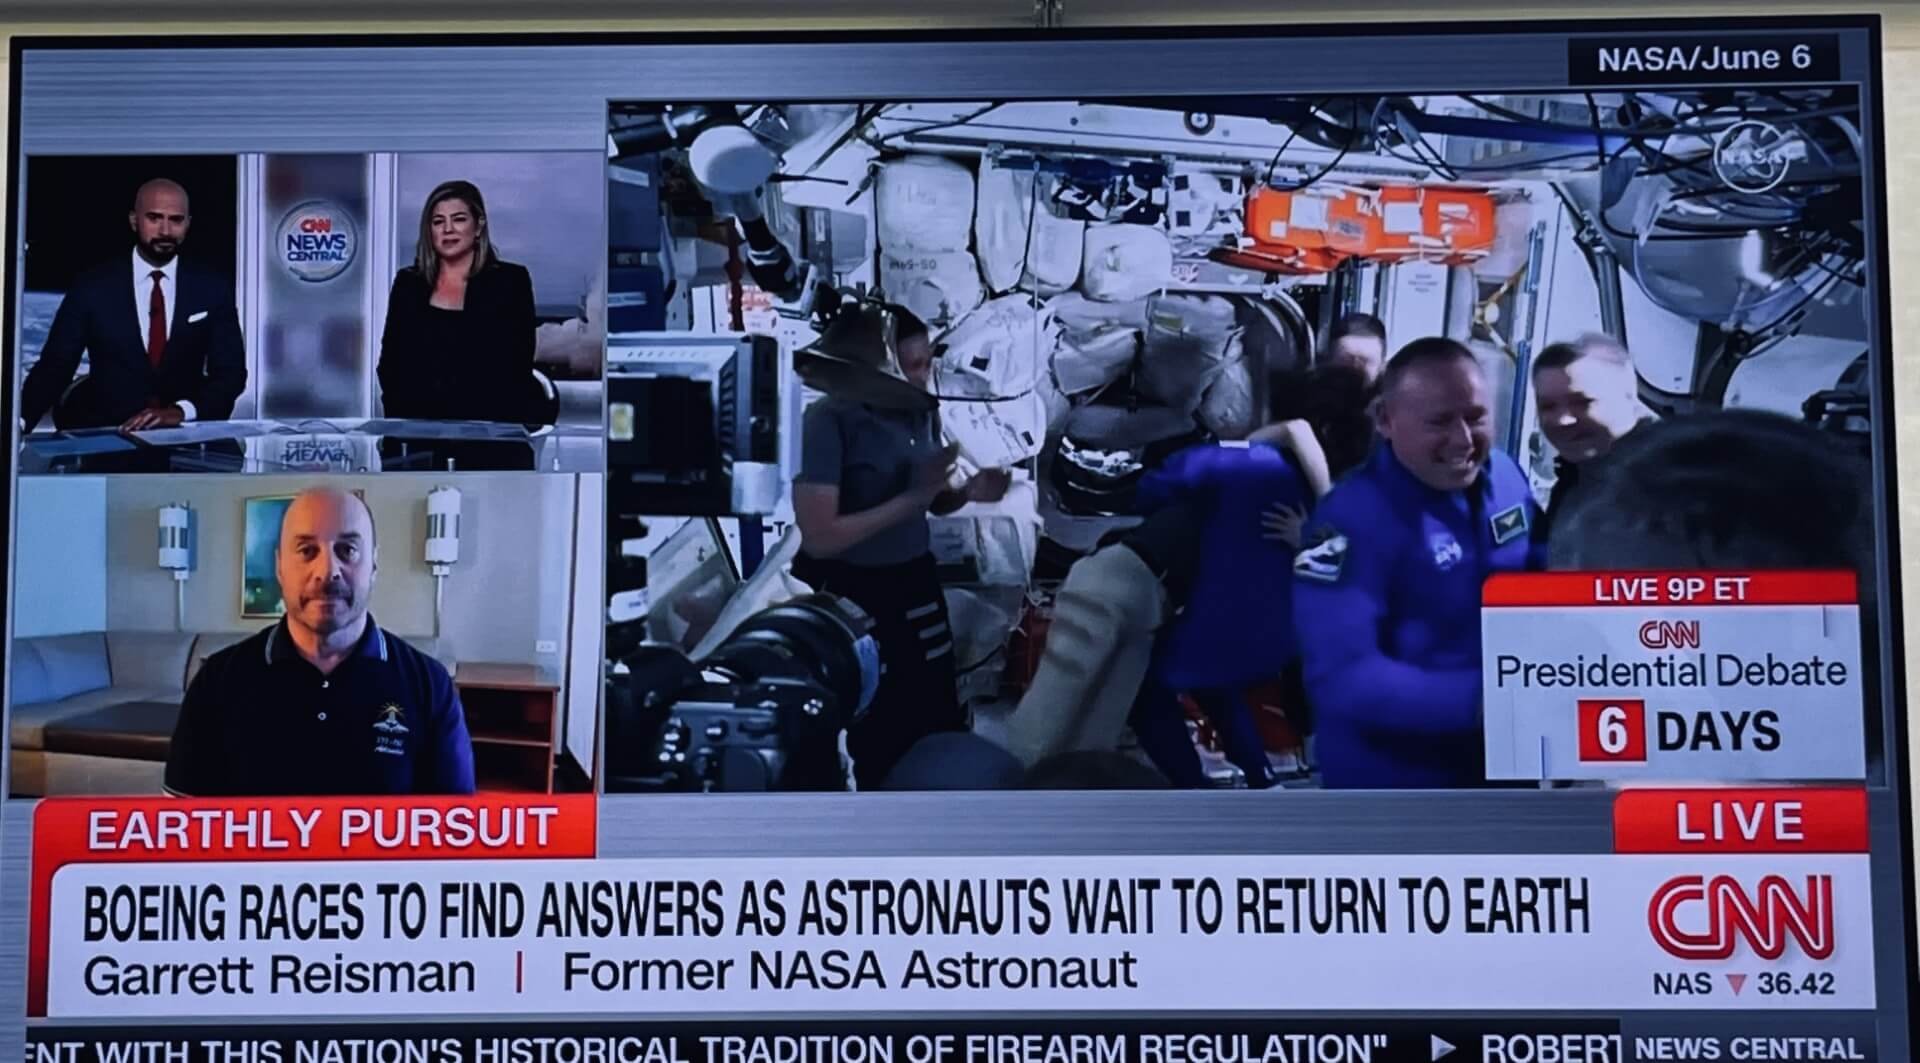 CNN (no link available): Boeing Races to Find Answers at Astronauts Wait to Return to Earth